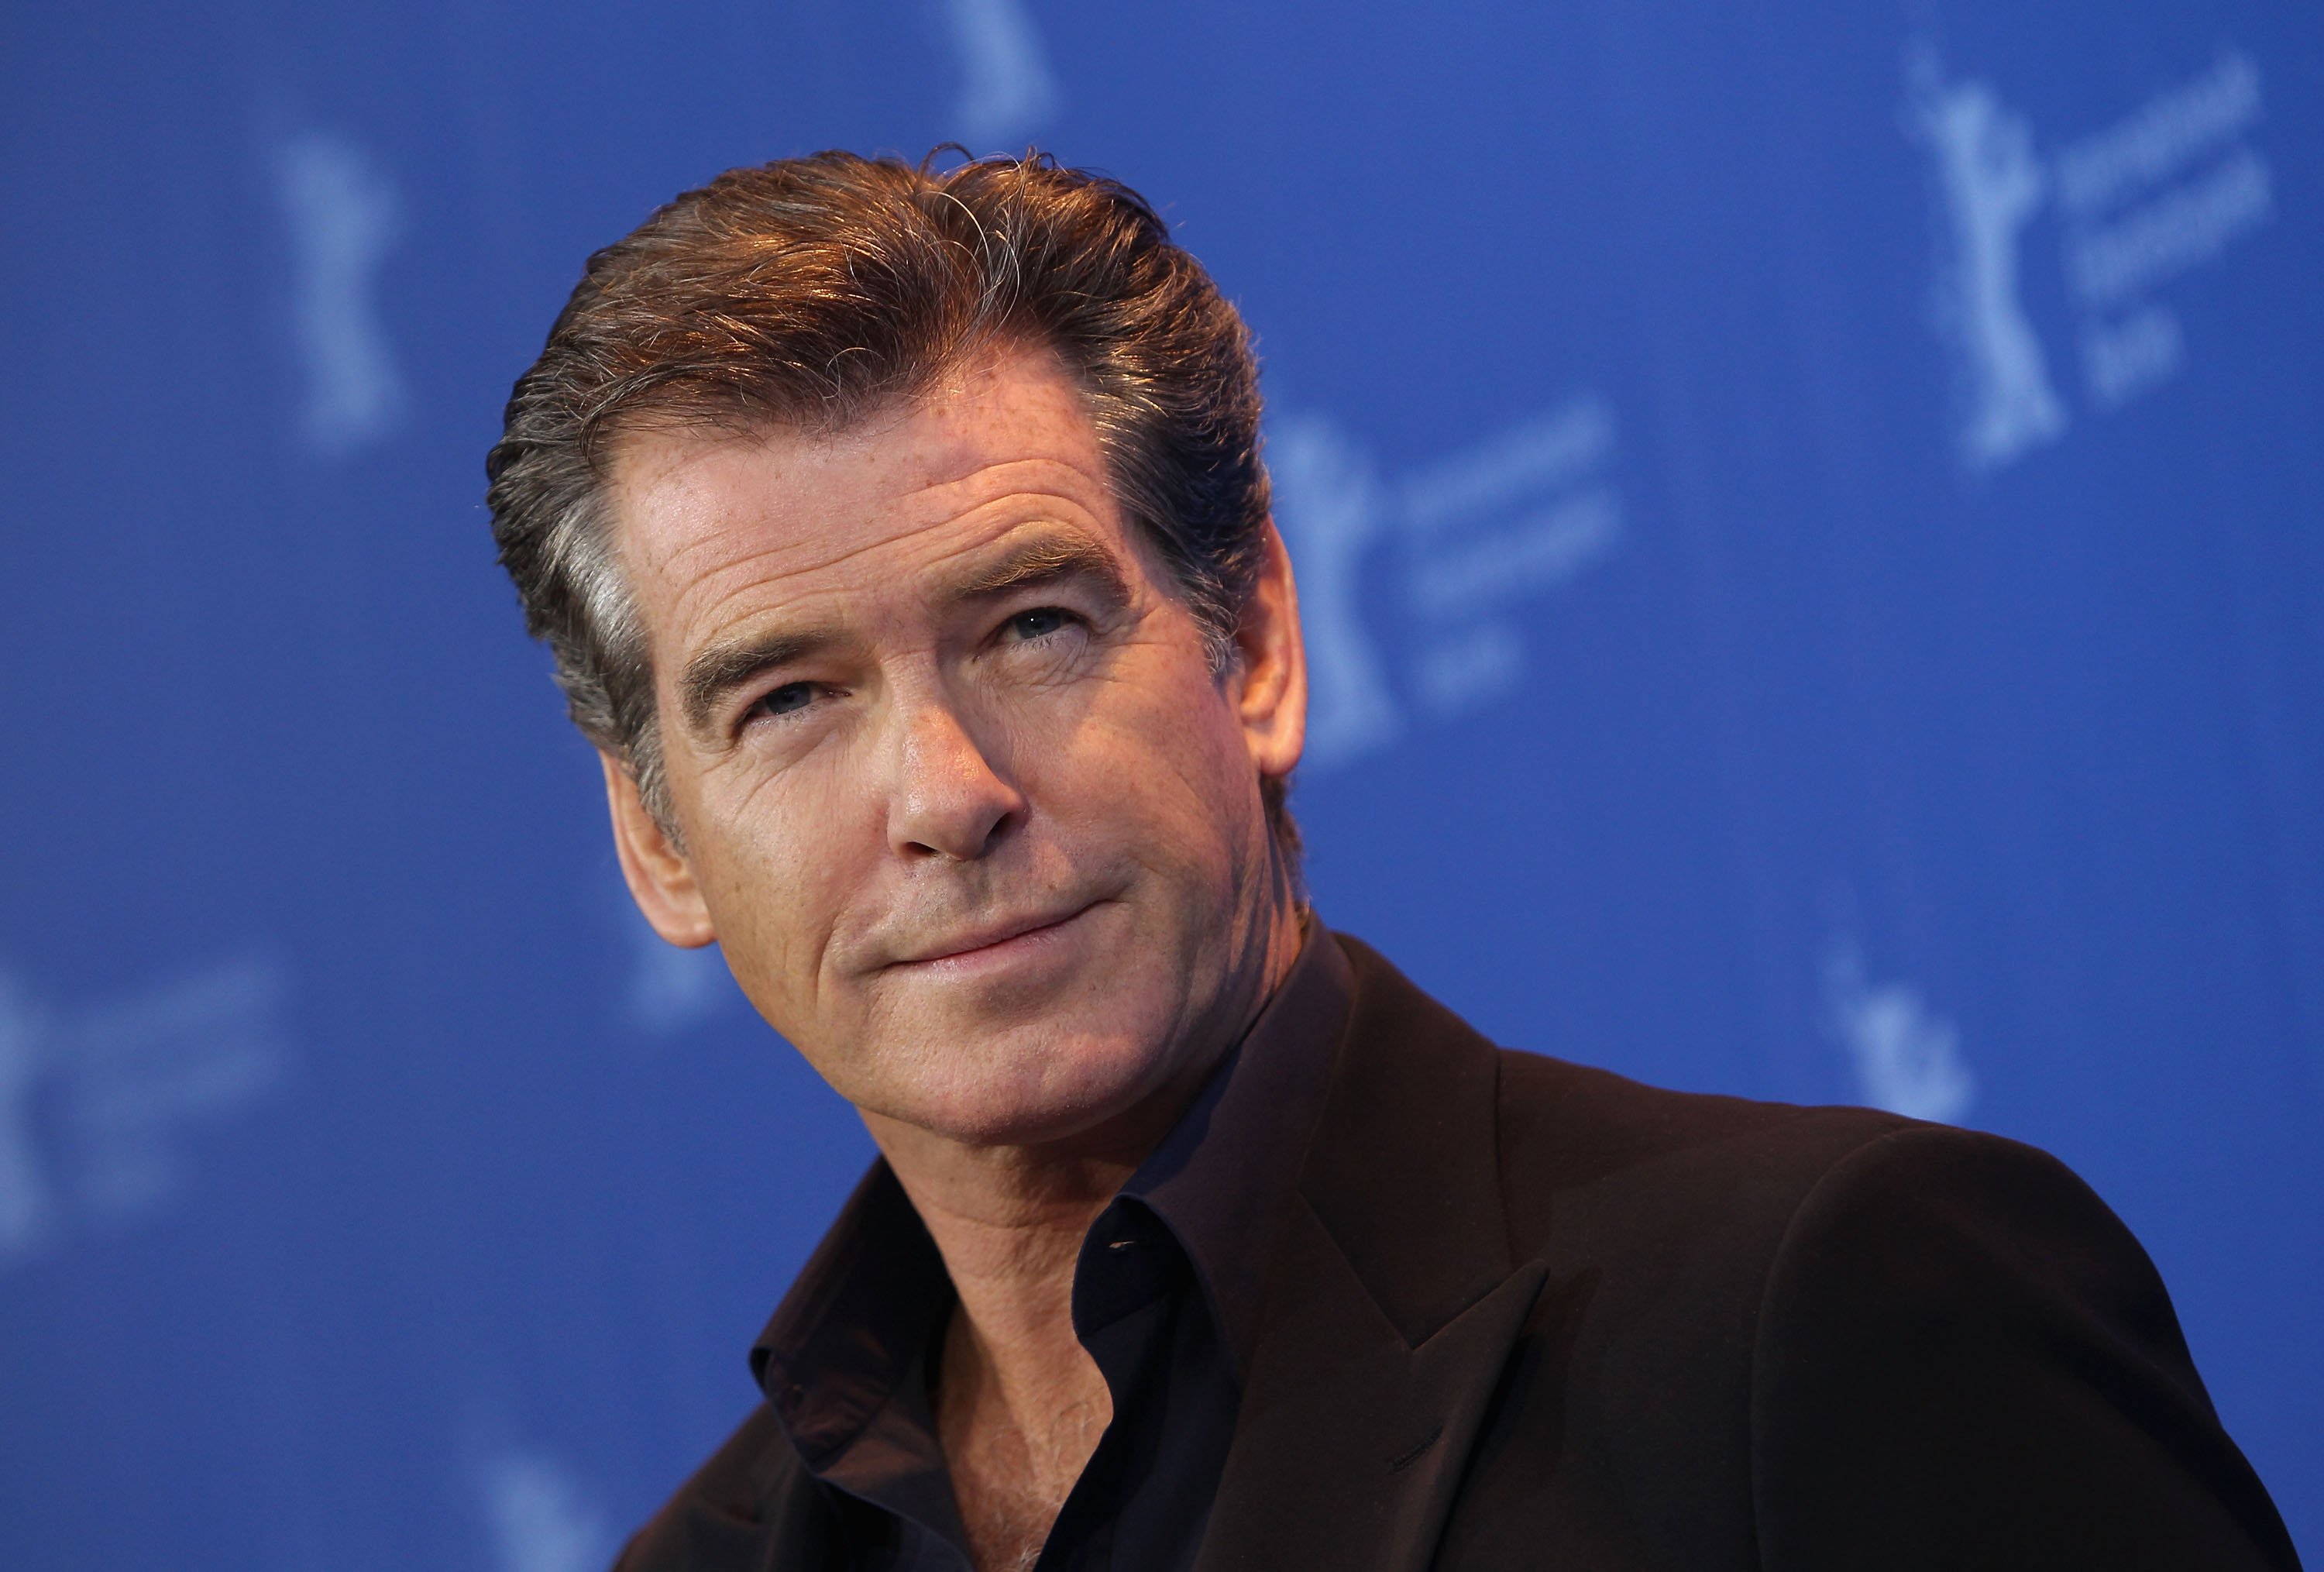 Pierce Brosnan at the 60th Berlin International Film Festival at the Grand Hyatt Hotel on February 12, 2010. | Photo: GettyImages